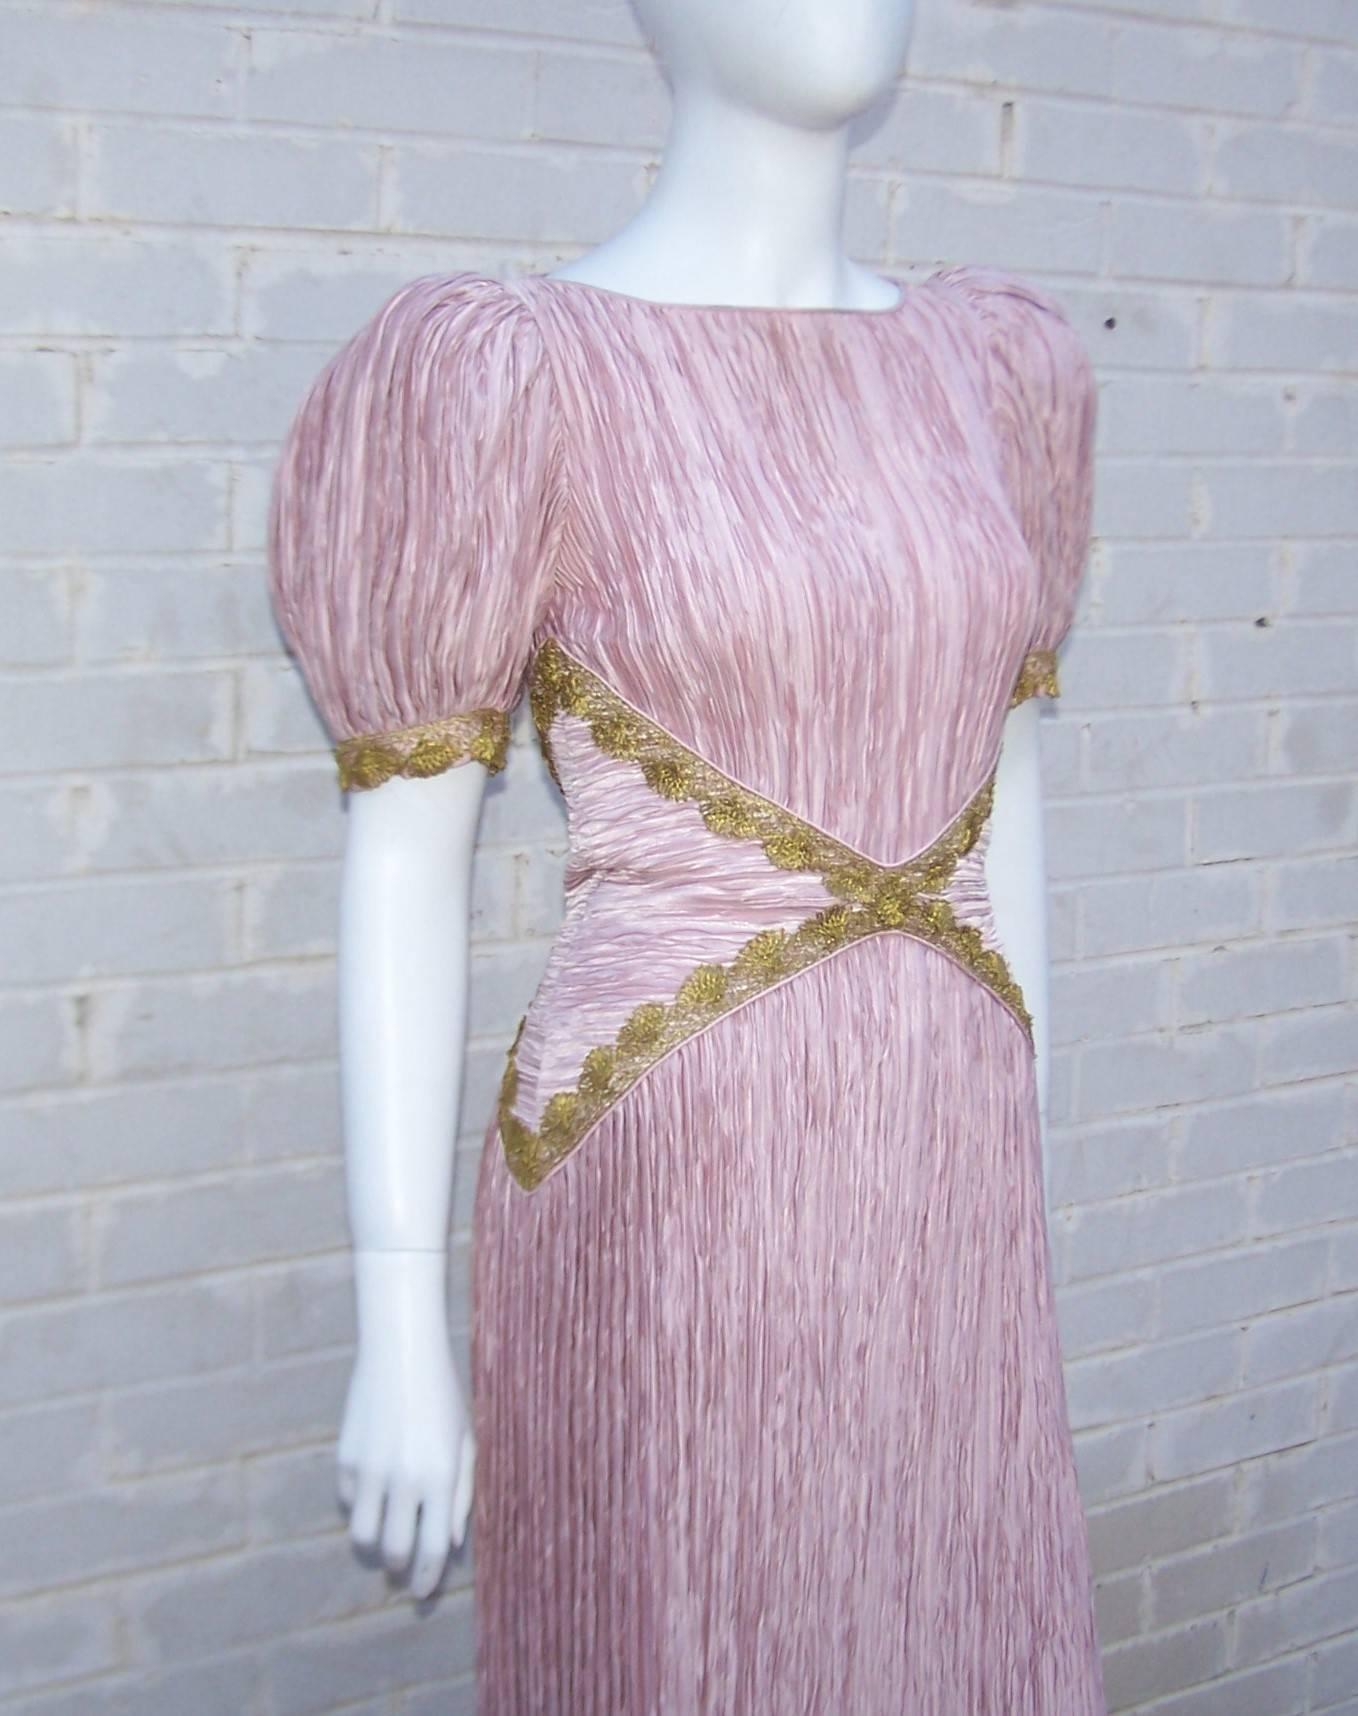 This lovely dress incorporates Mary McFadden's signature exotic style with ultra feminine details to create a modern goddess silhouette perfect for many occasions.  The pale rose pink micro pleated fabric is a nod to the feminine designs of Mario